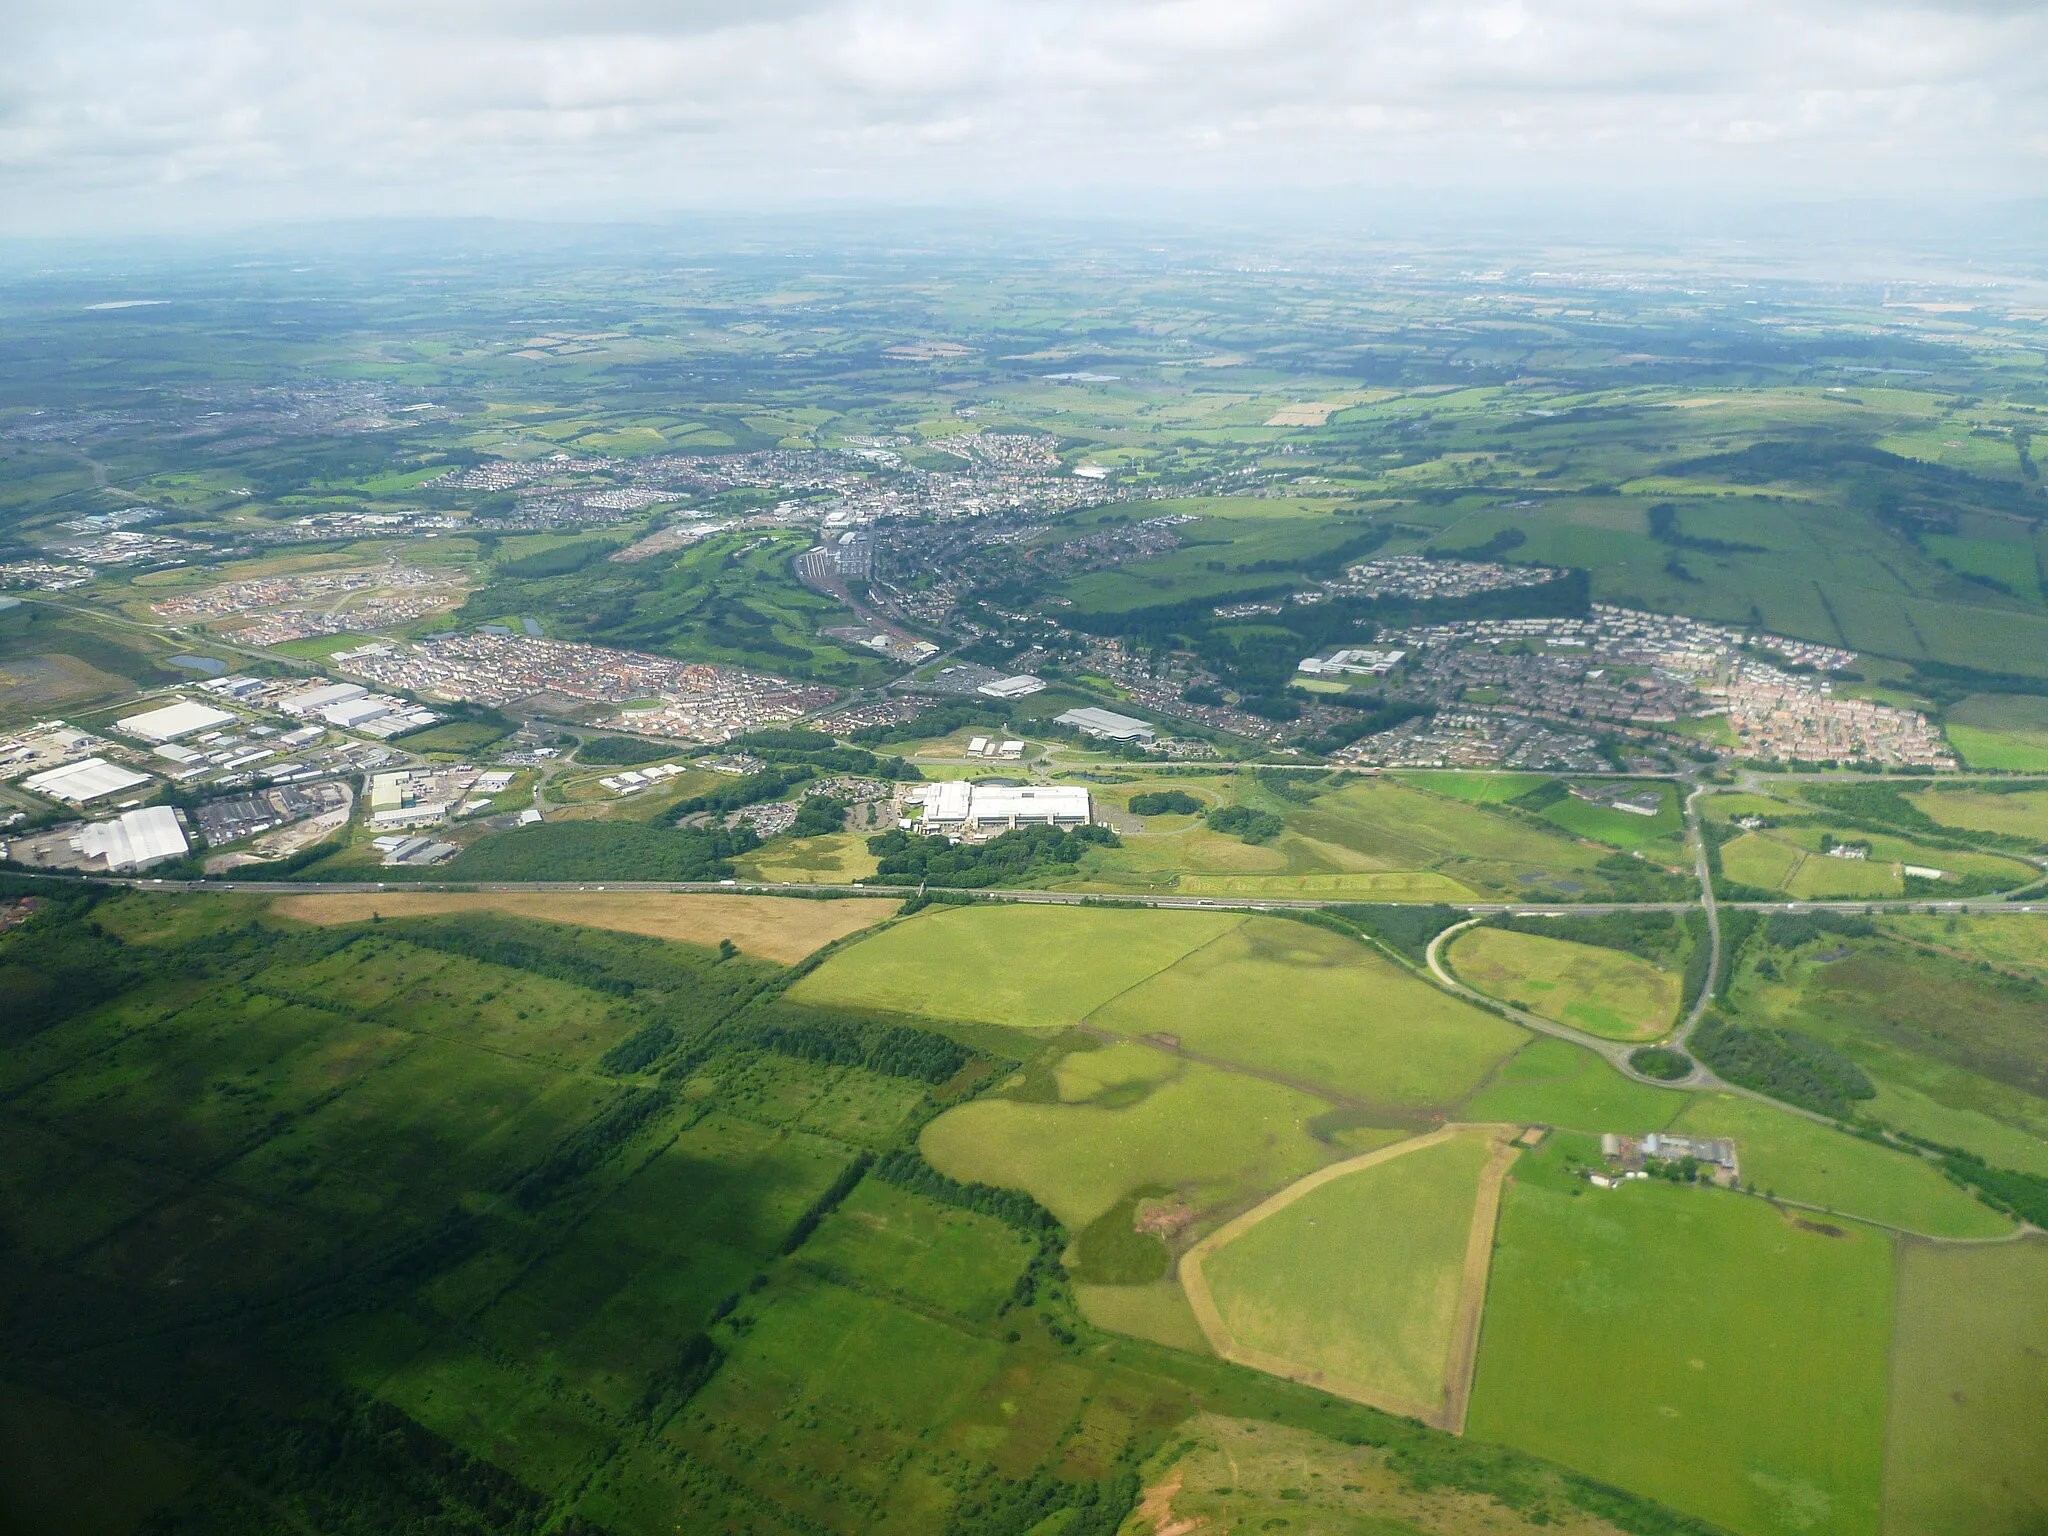 Photo showing: View of Bathgate, West Lothian from an aeroplane approaching Edinburgh Airport. The town can be seen on the north side of the M8 motorway with the Whitehill Industrial Estate on the left, the Pyramids Business Park in the centre and Boghall on the right.